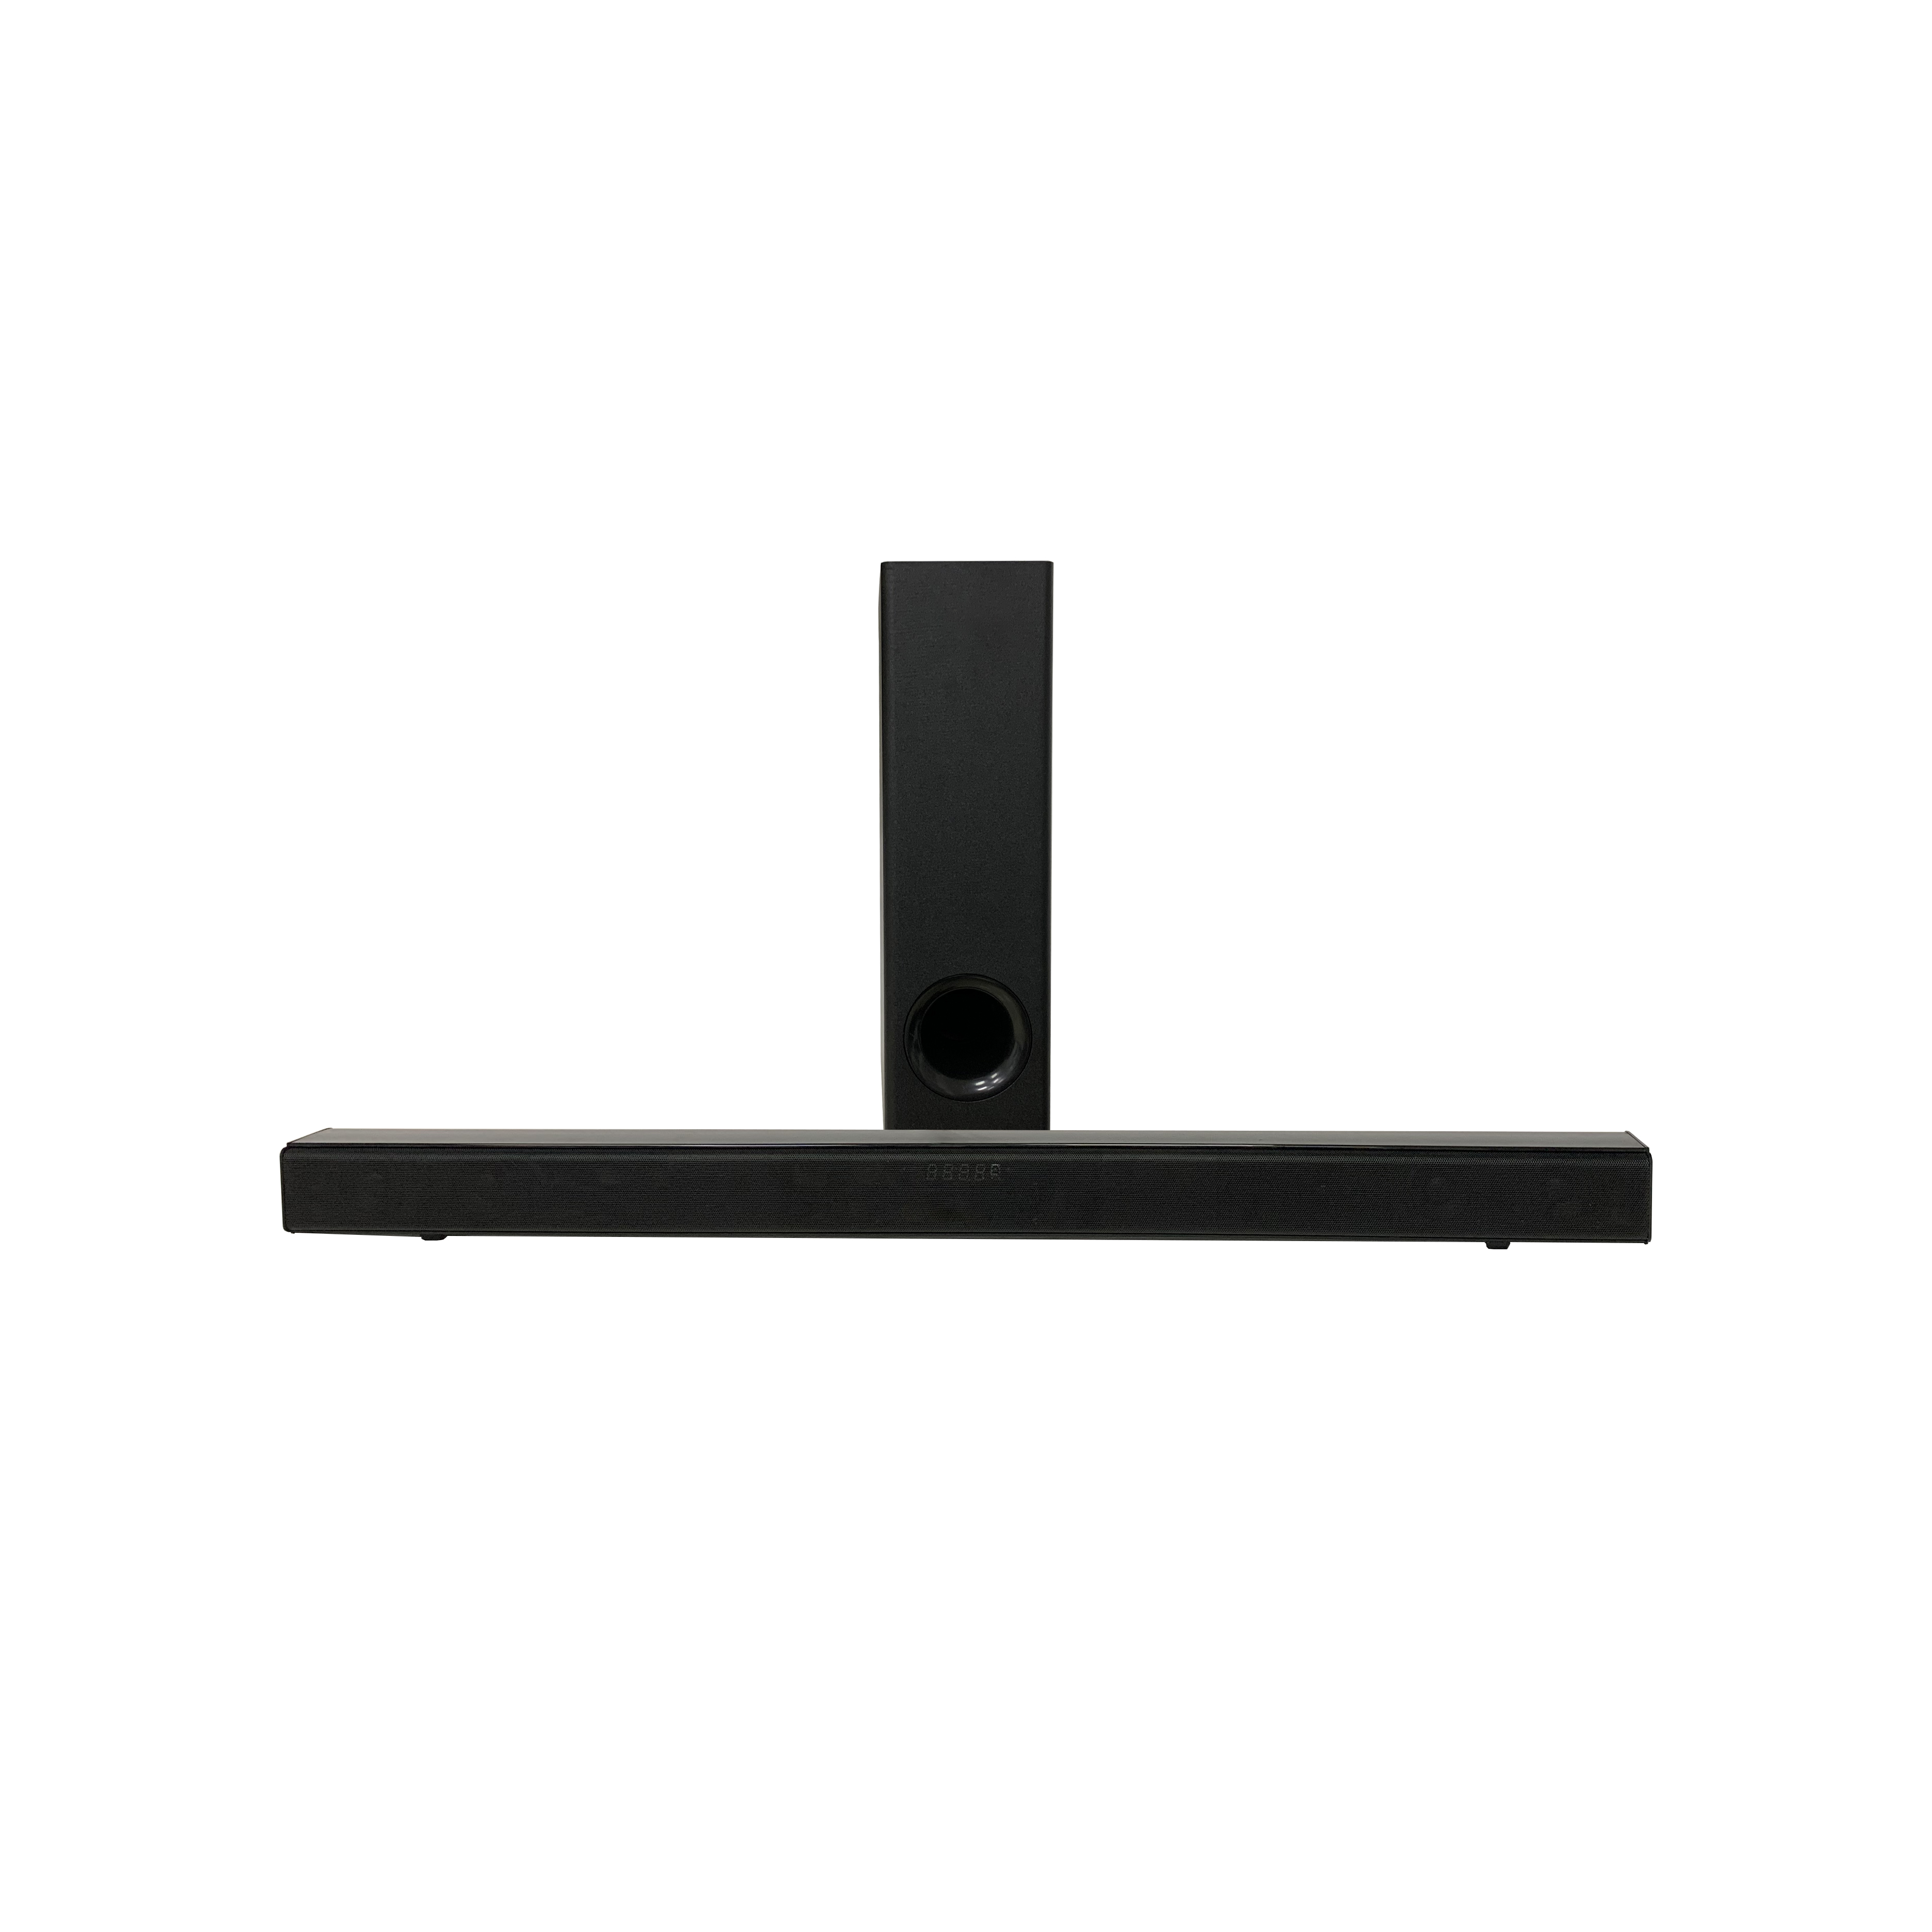 2.1ch soundbar with wired Subwoofer